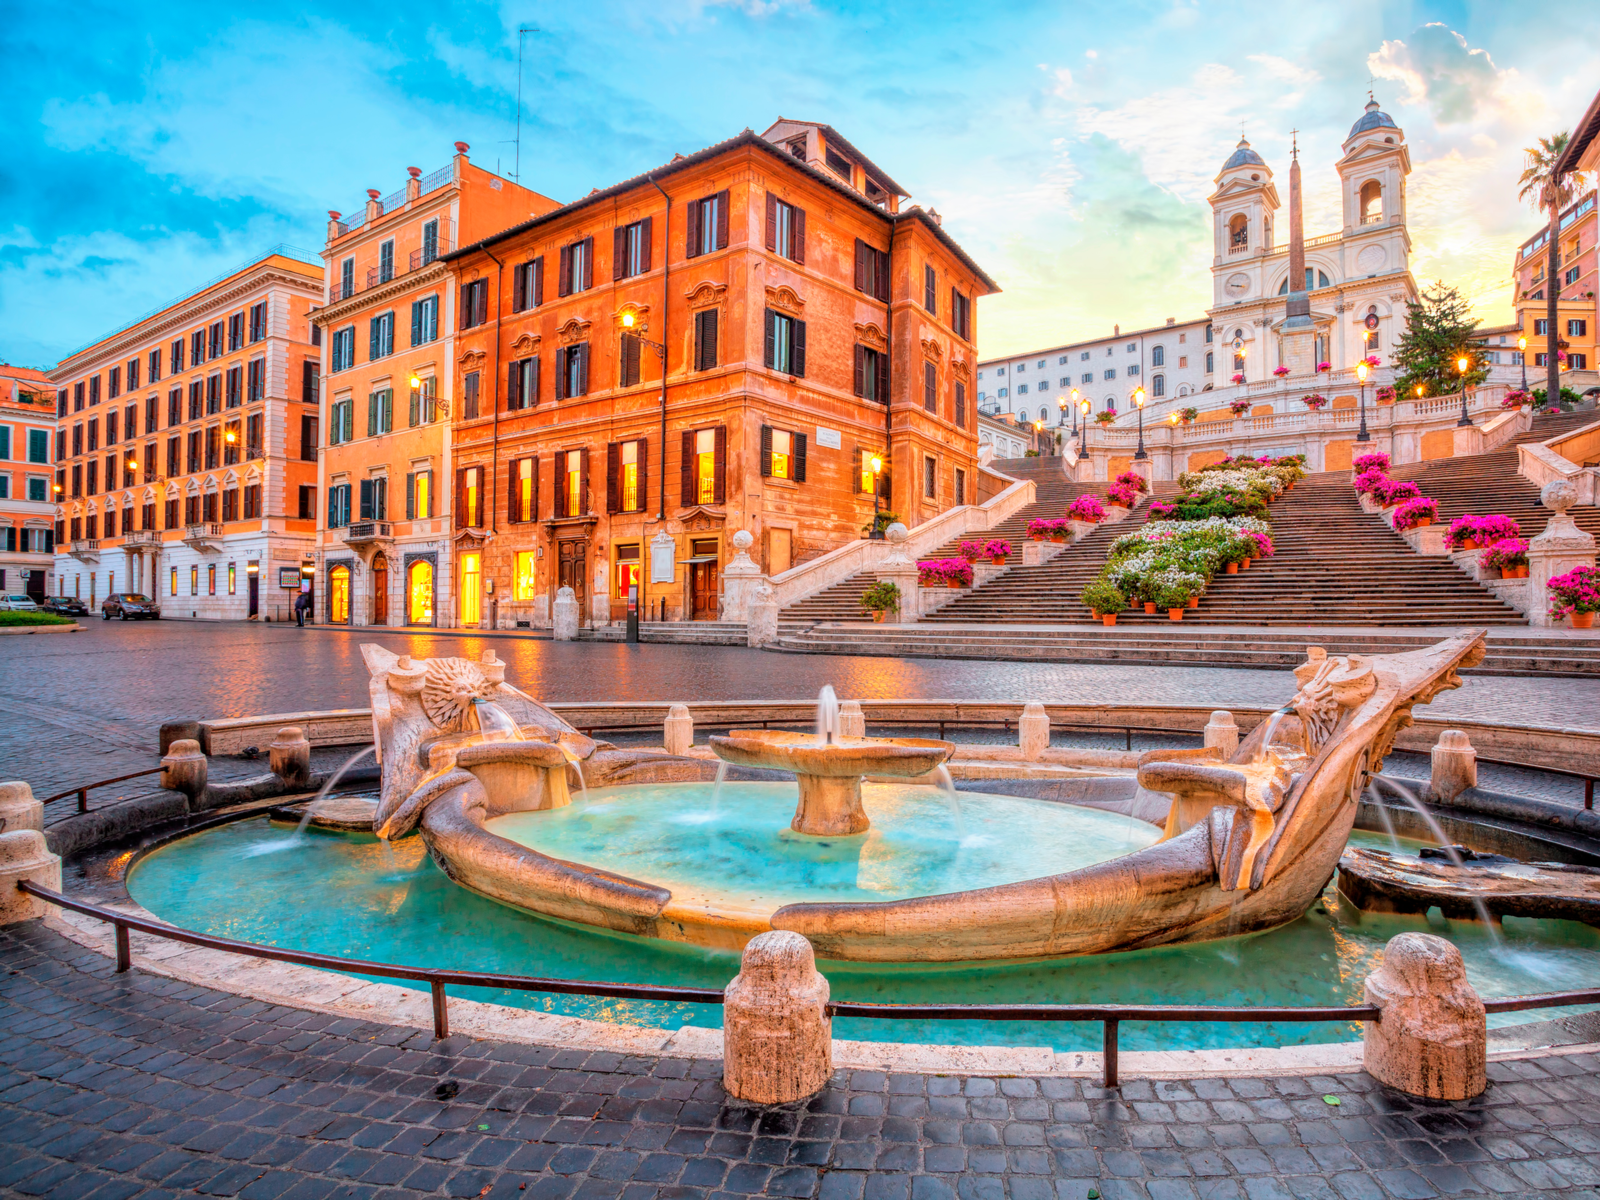 As an image for a post on the best places to stay in Rome, the Piazza de Spagna in Rome, Italy